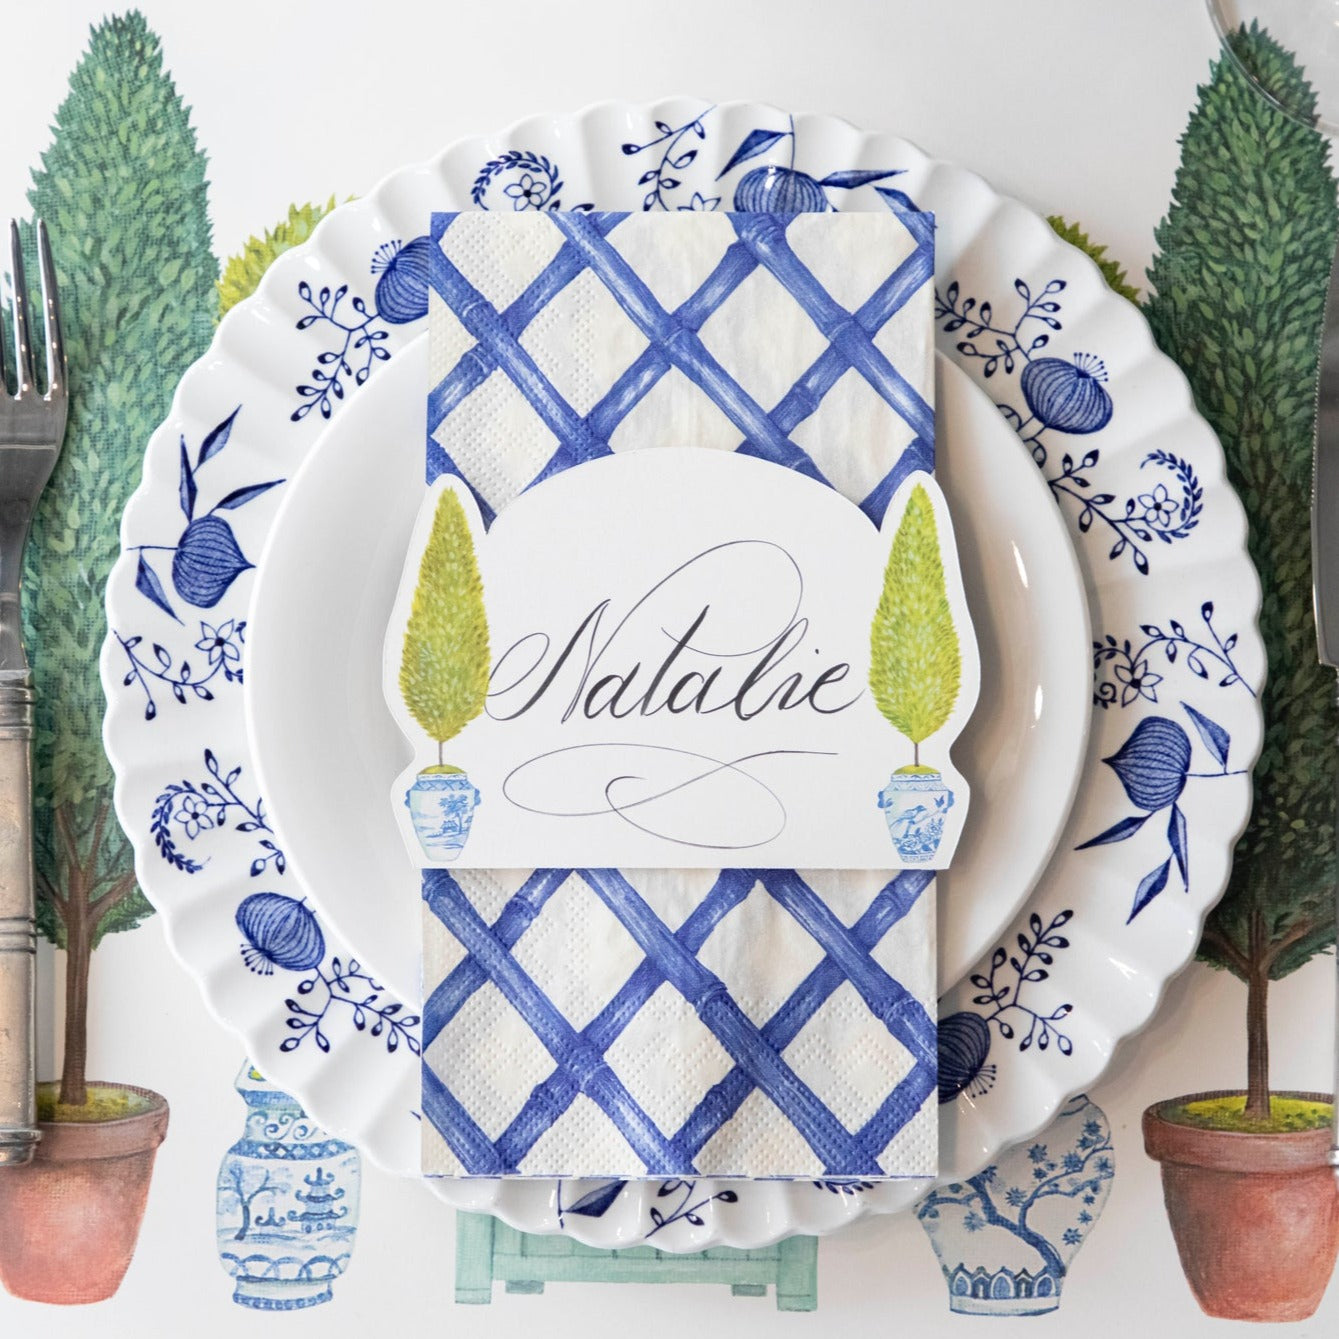 Top-down view of an elegant place setting featuring a Topiary Place Card labeled &quot;Natalie&quot; laying flat on the plate.